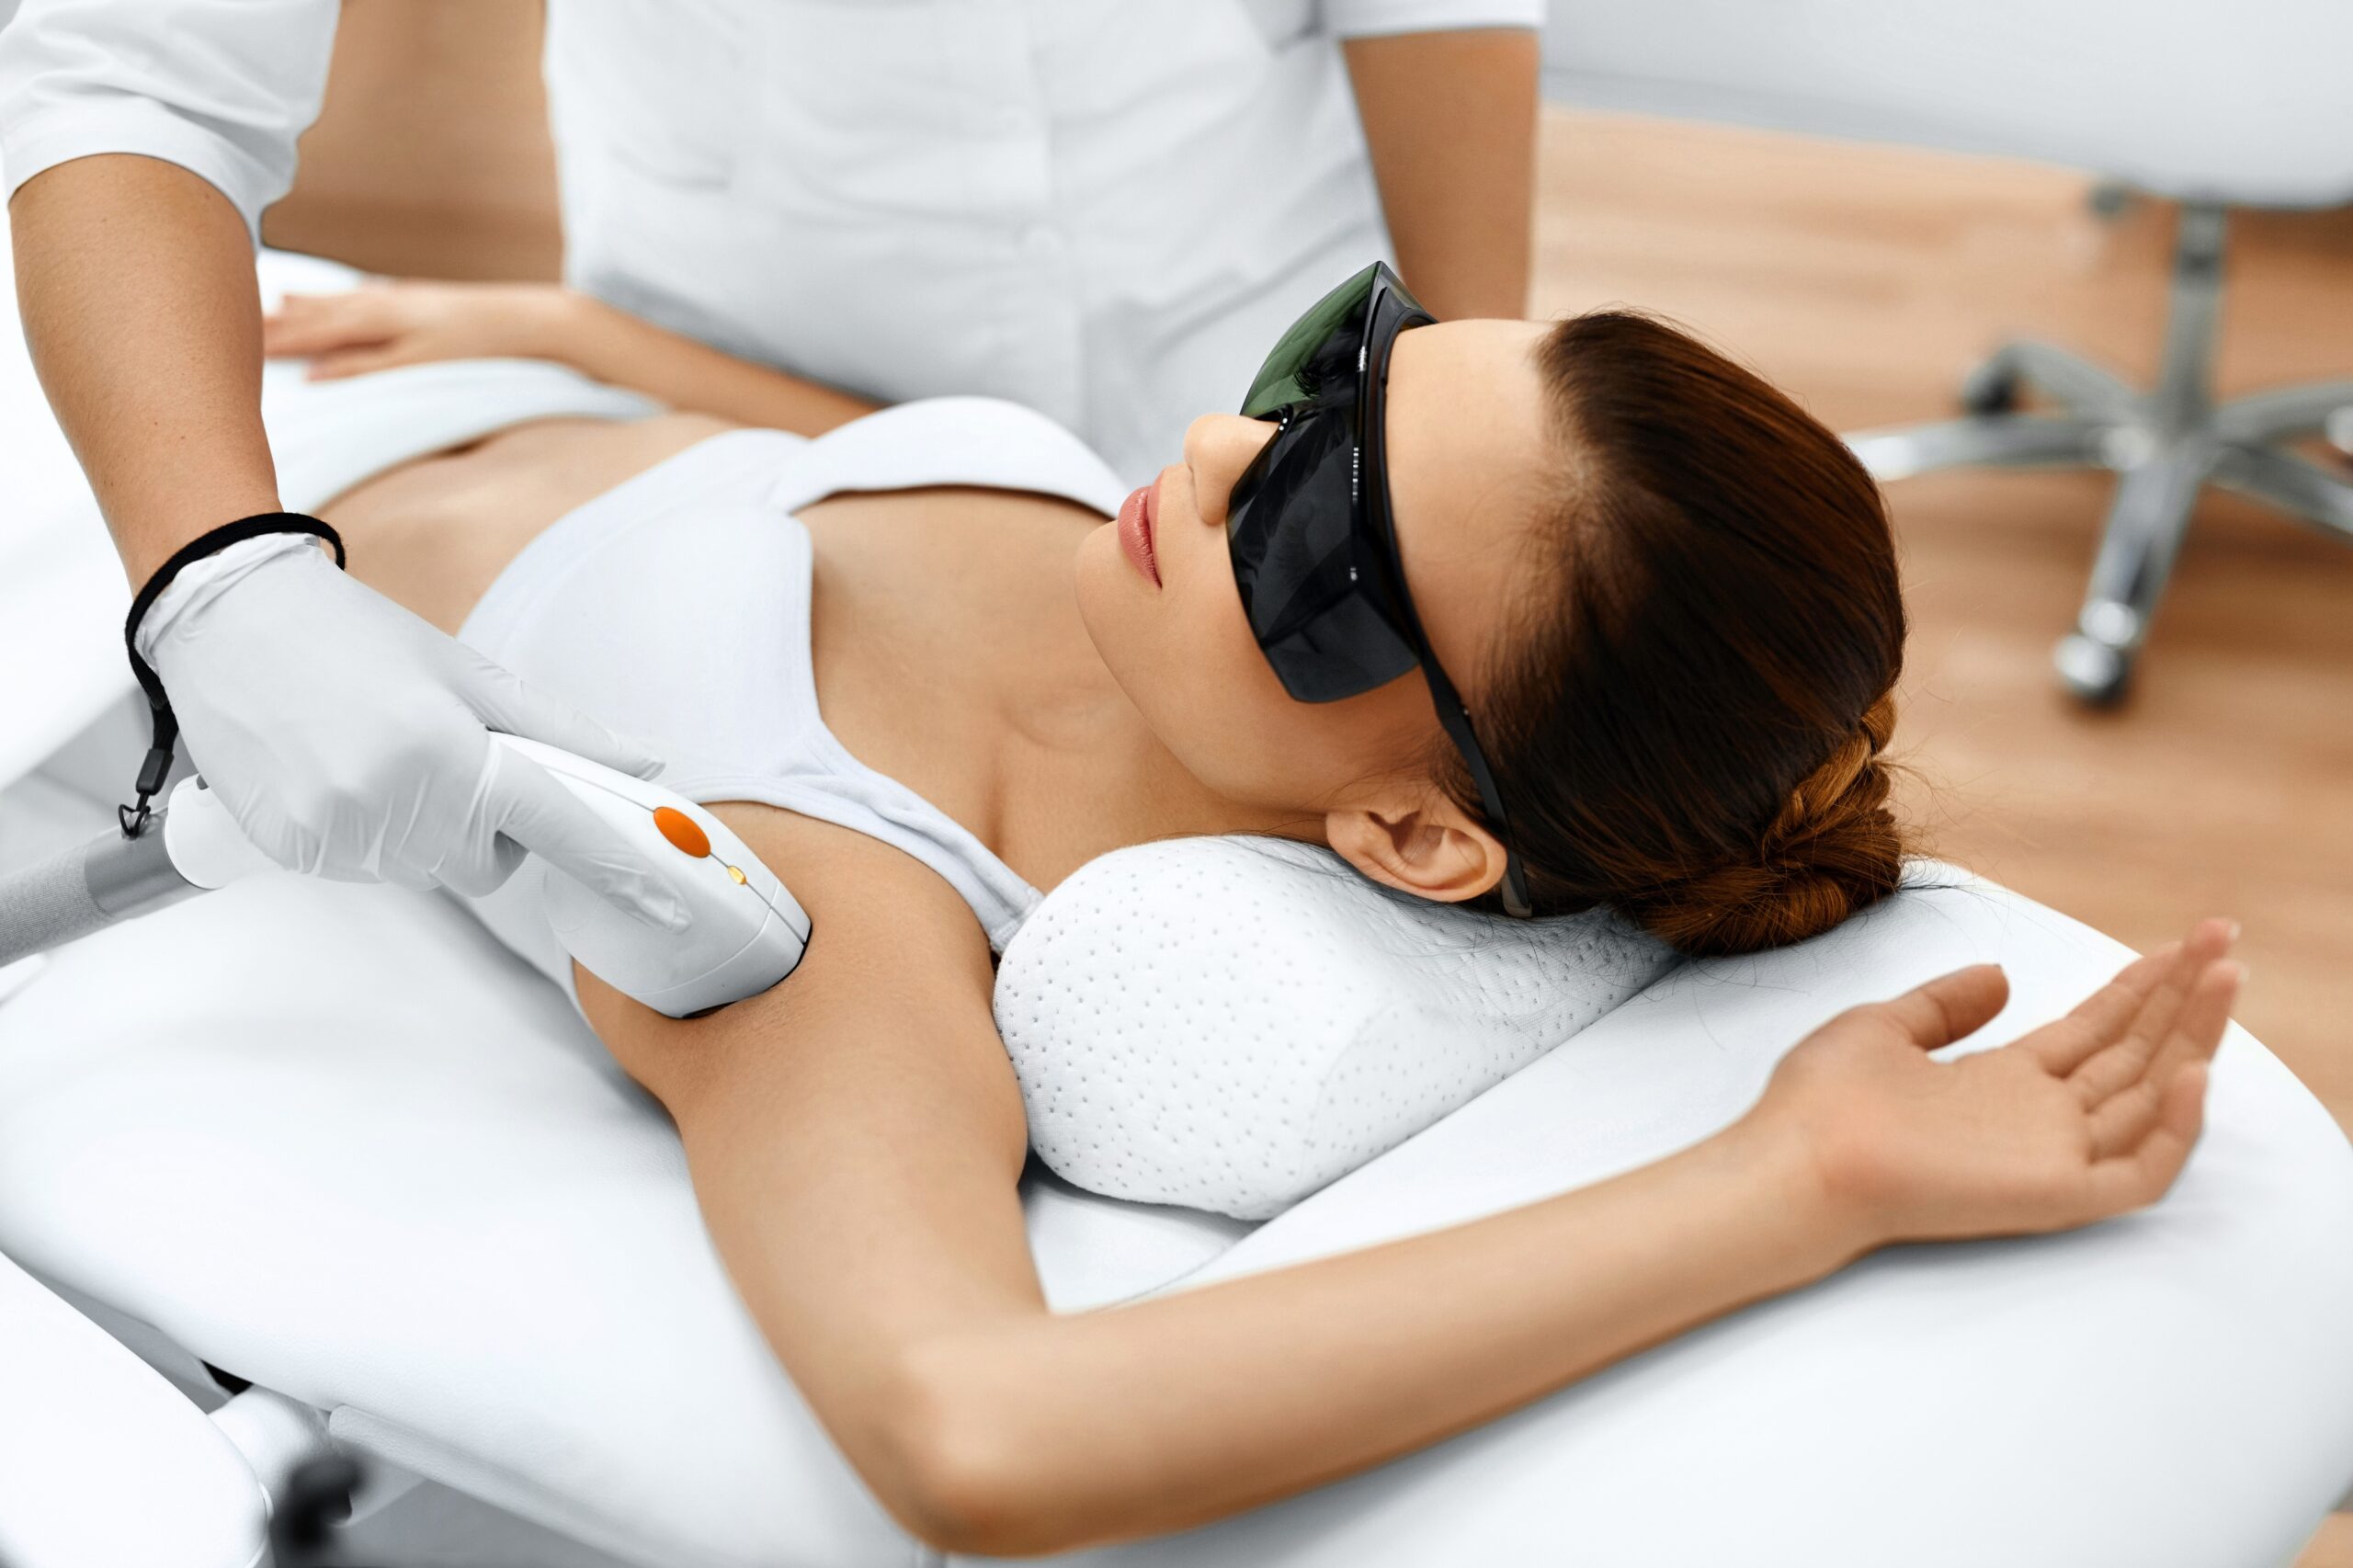 best laser hair removal